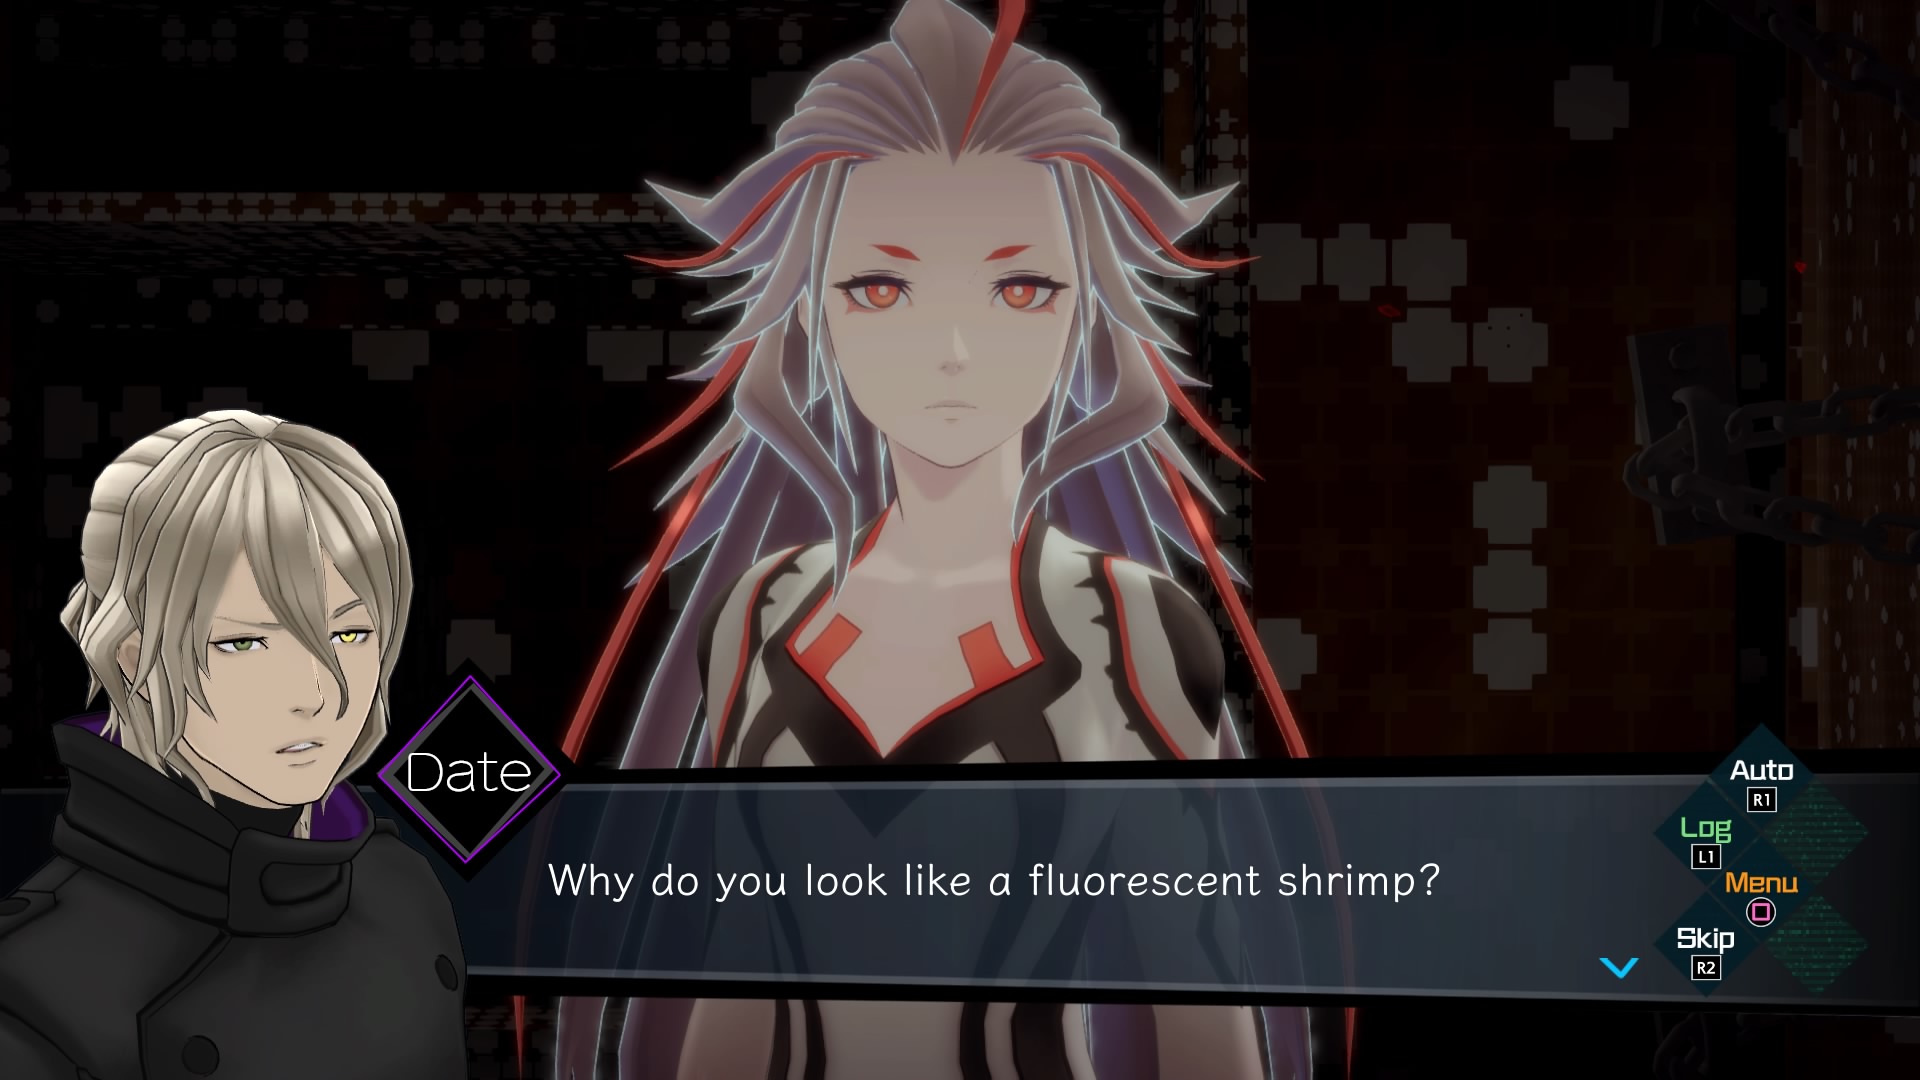 AI The Somnium Files PS4 Review